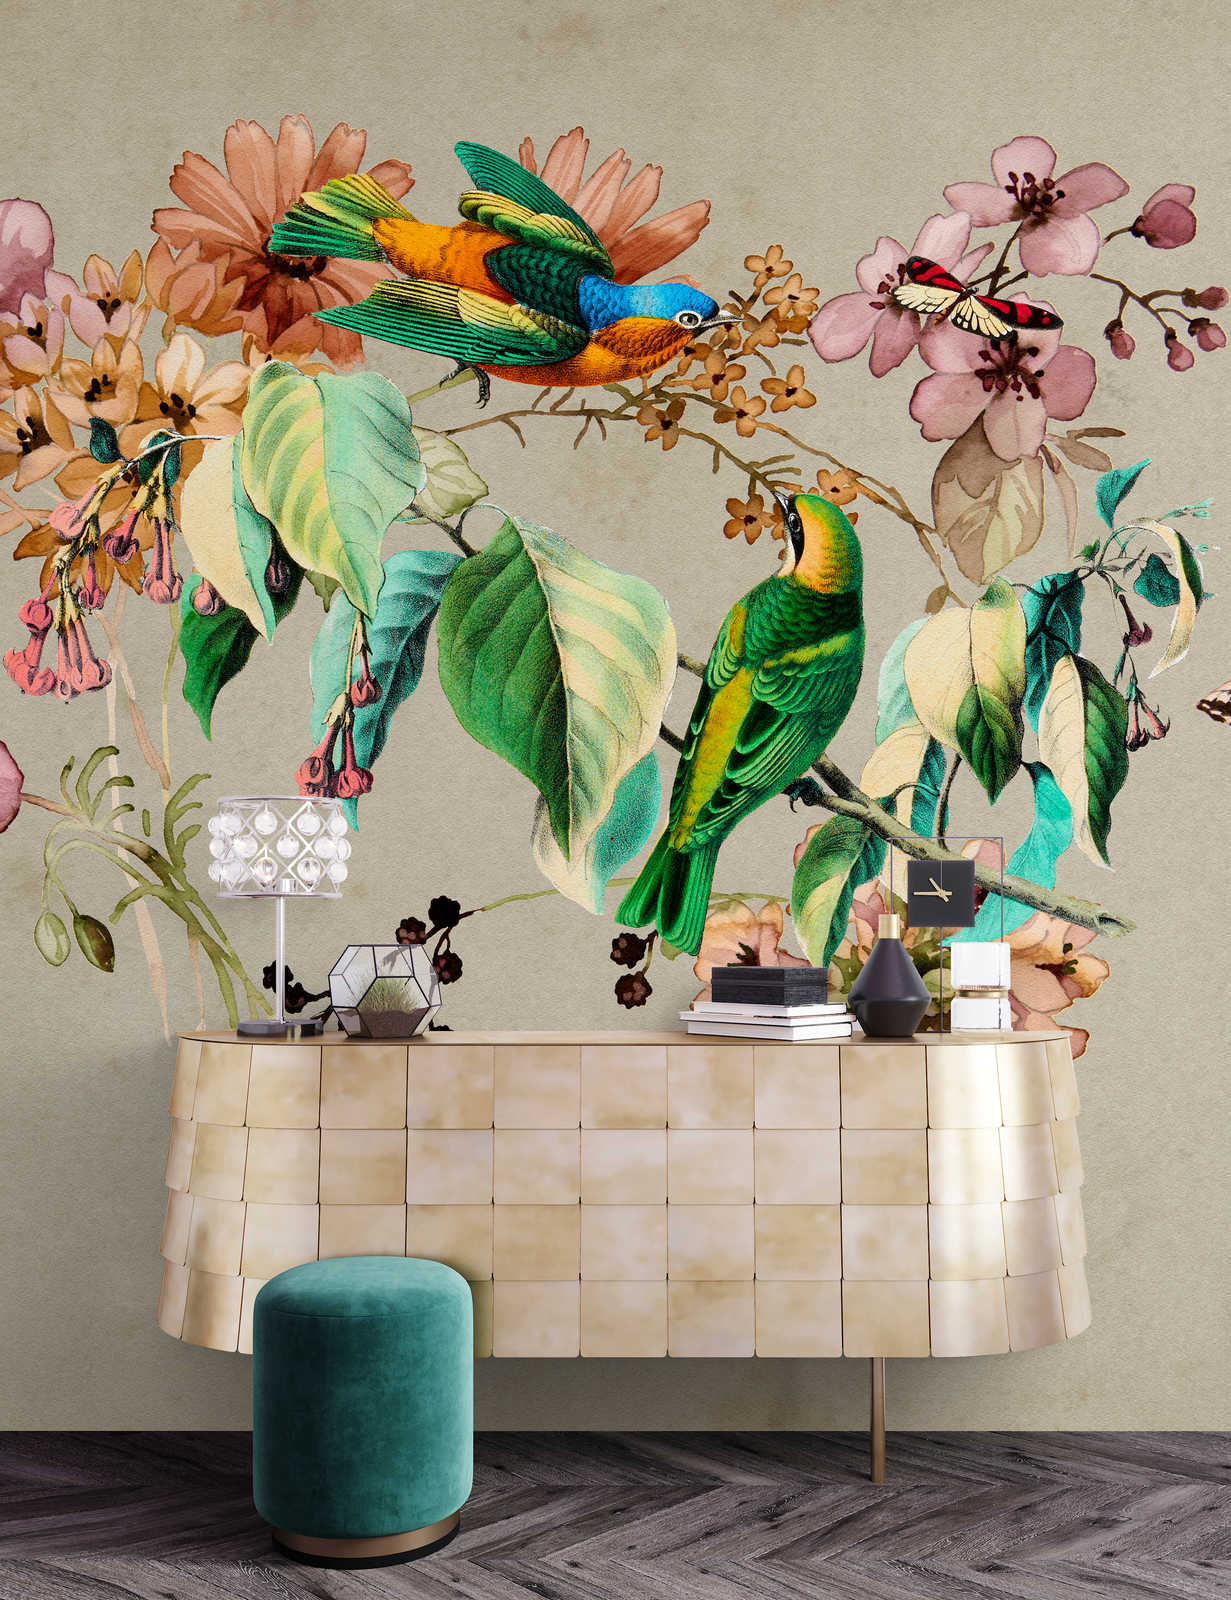             Love Nest 1 - mural with watercolour flowers & colourful birds
        